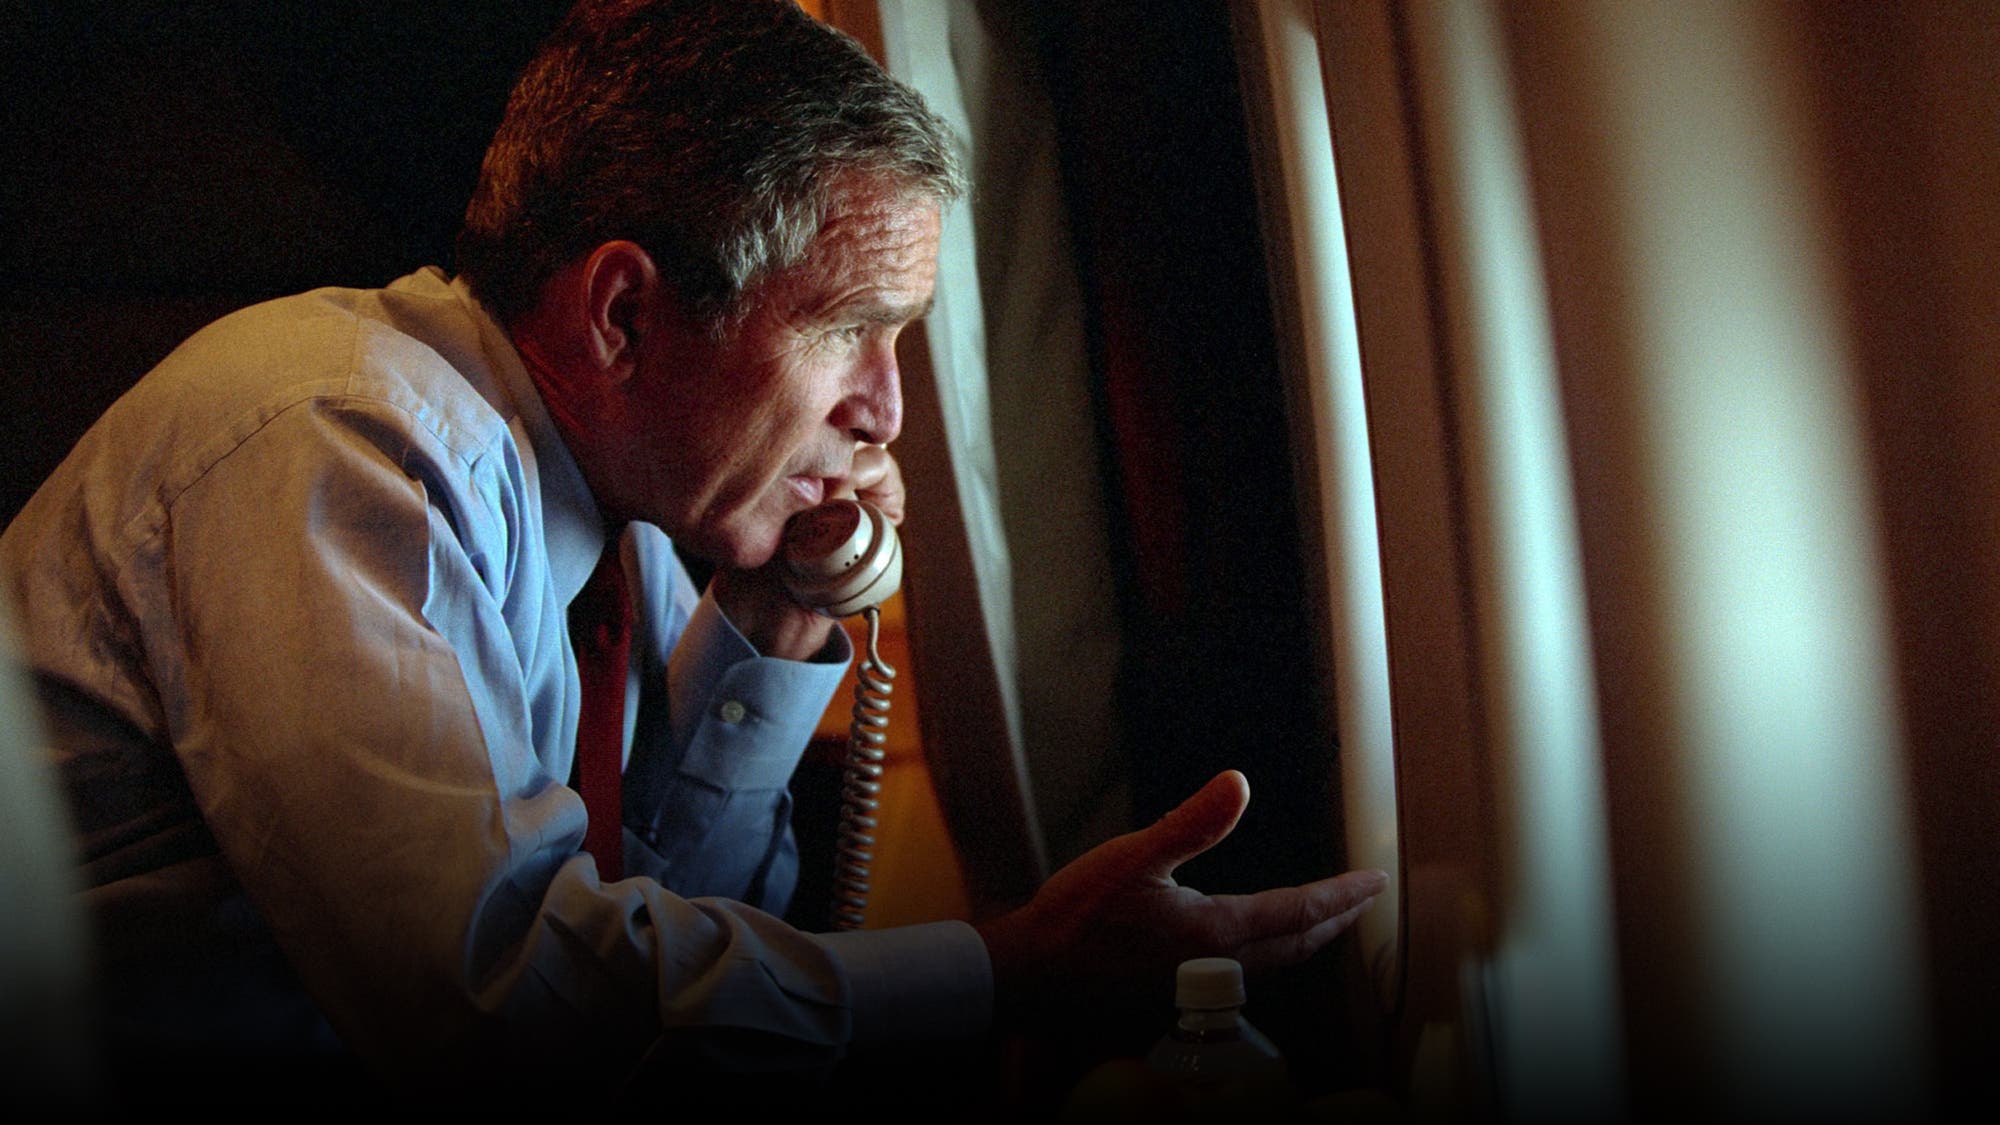 September 11, 2001, George W Bush on Air Force One